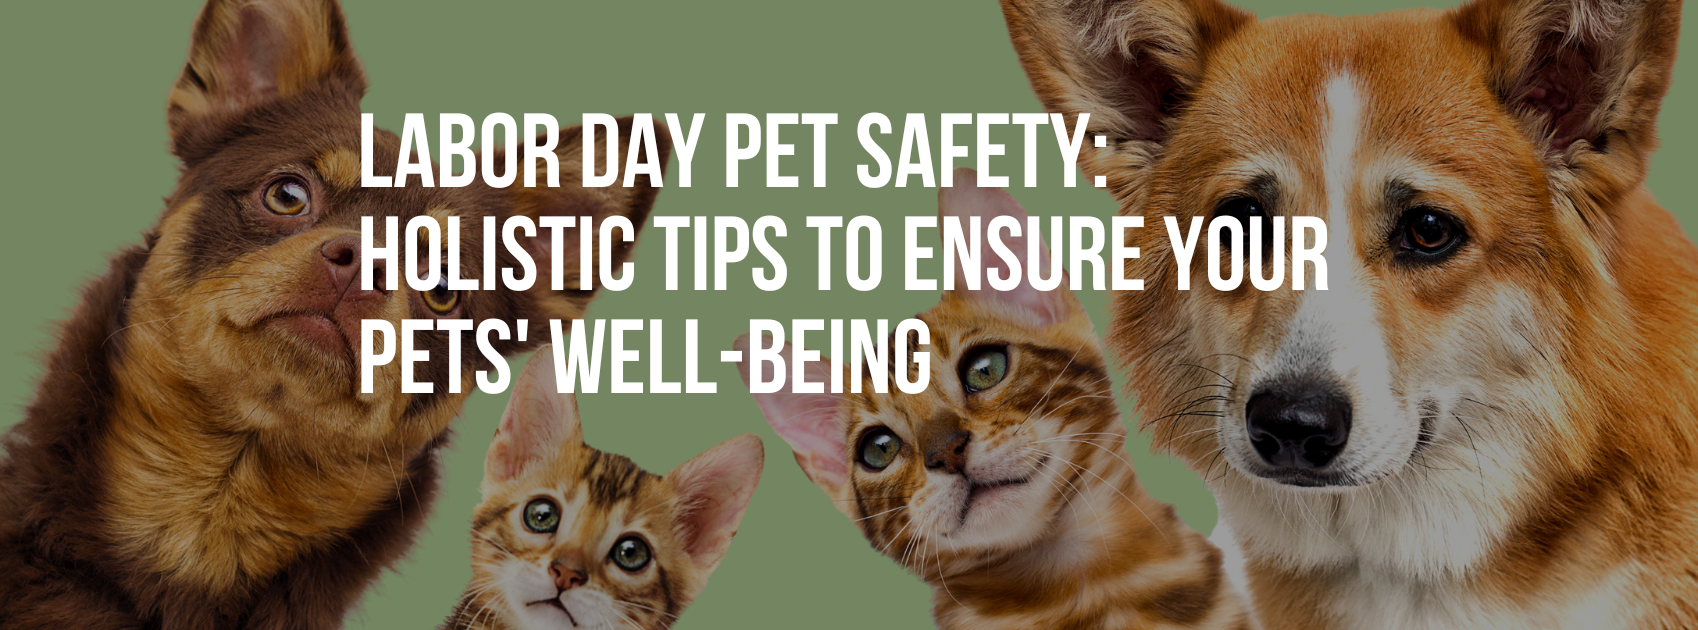 Labor Day Pet Safety: Holistic Tips to Ensure Your Pets' Well-being